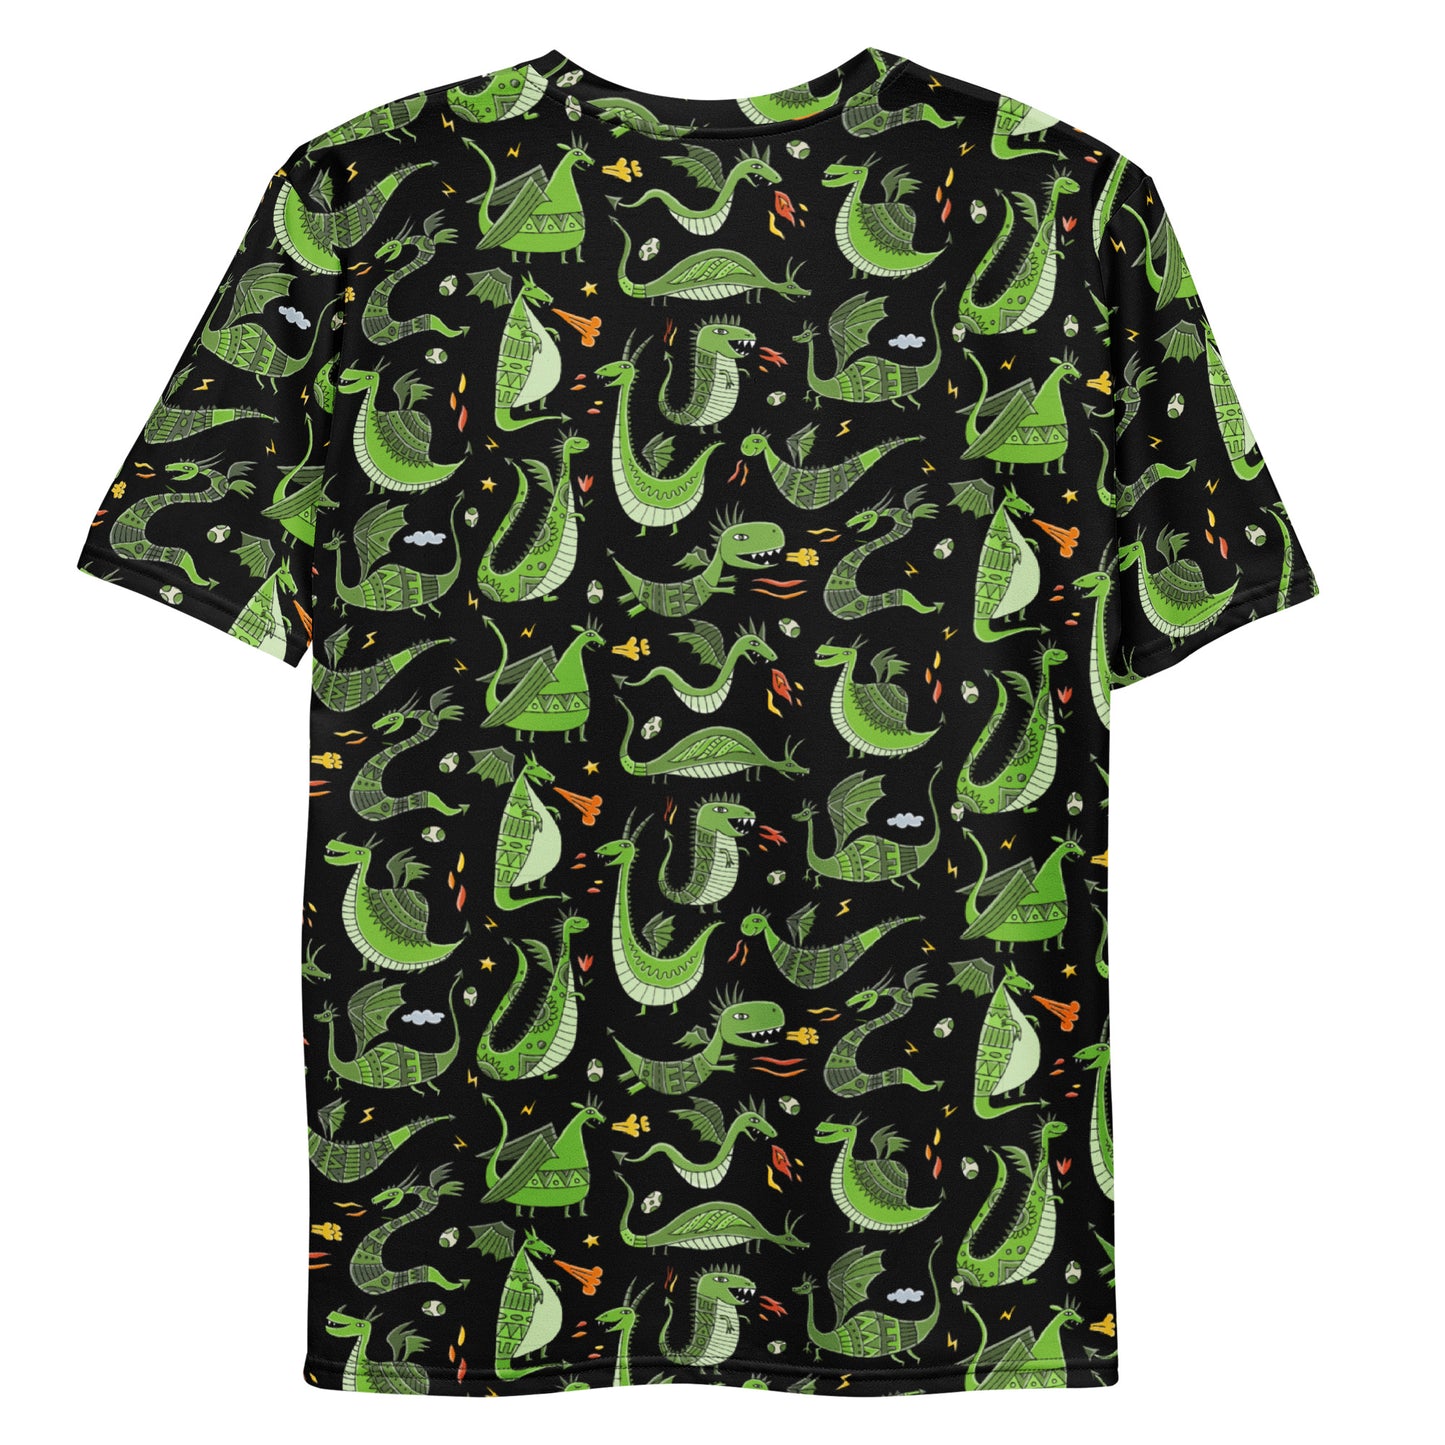 Men's t-shirt black color with funny green Dragons designer print for new year 2024. Back side